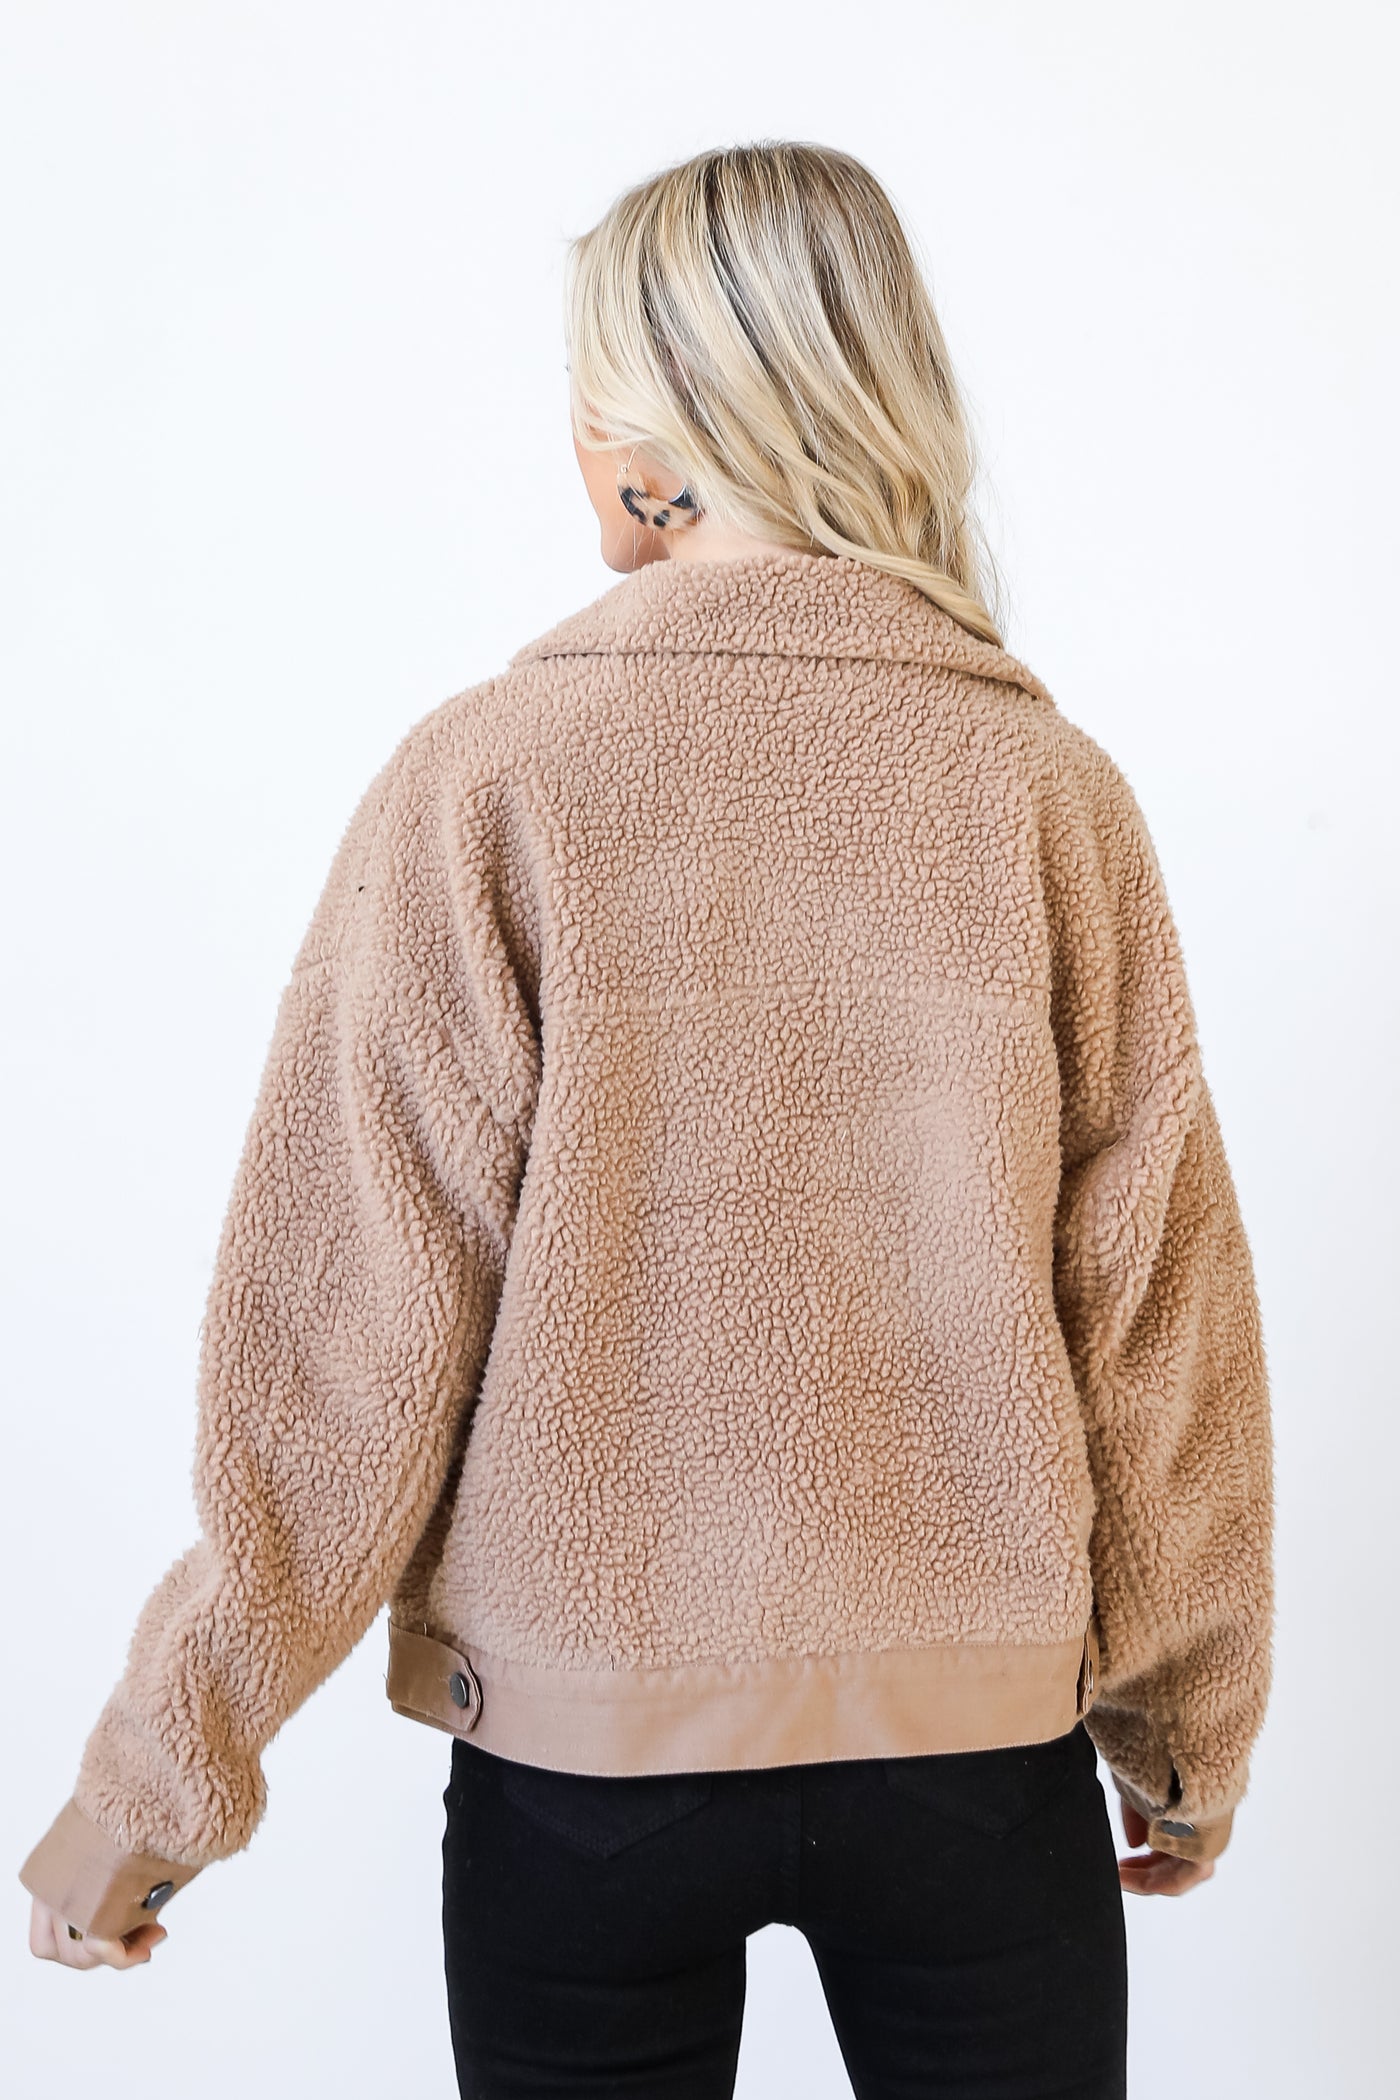 Sherpa Denim Jacket in taupe back view